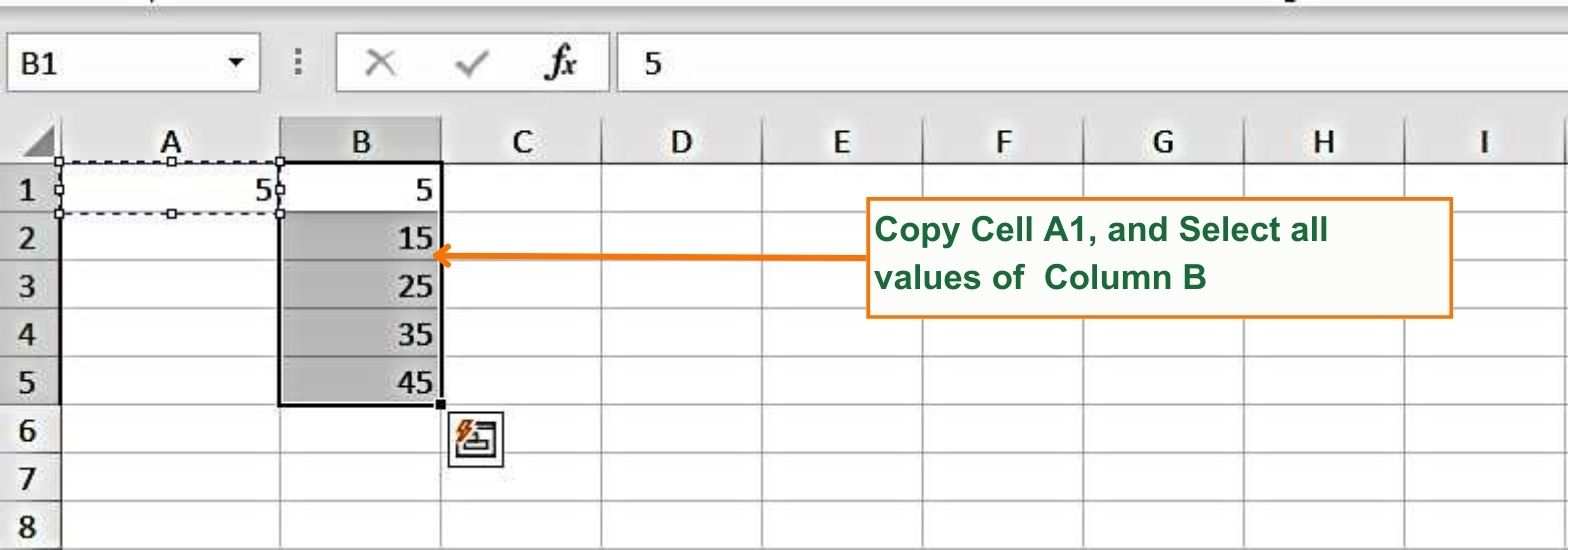 How to subtract a single fixed value from the table without using the minus sign. - Copy of A1, and selection of Column B